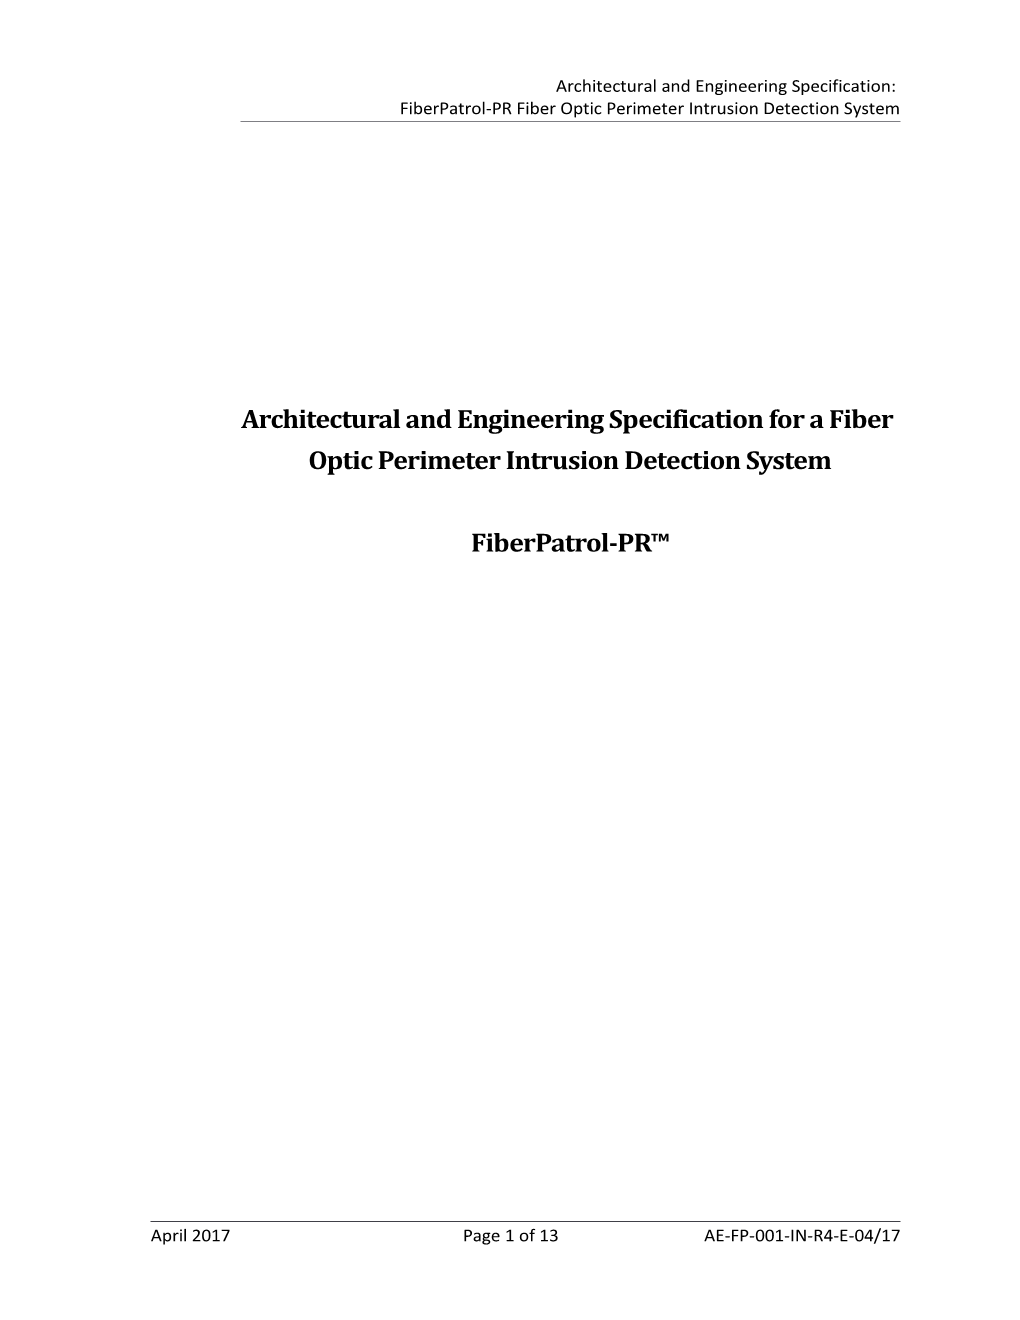 Architectural and Engineering Specification for a Fiber